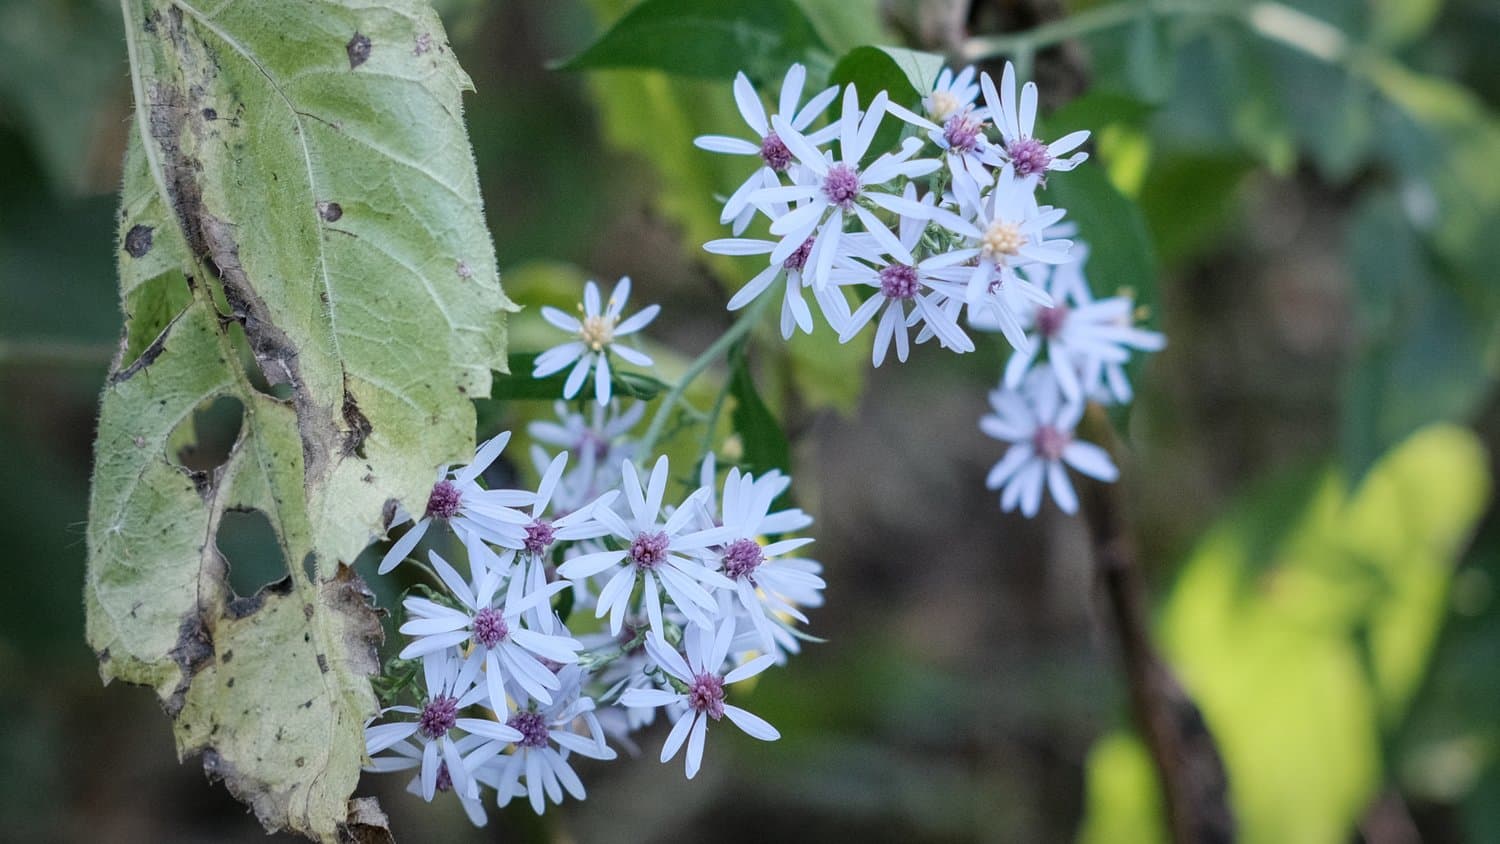 Calico aster.